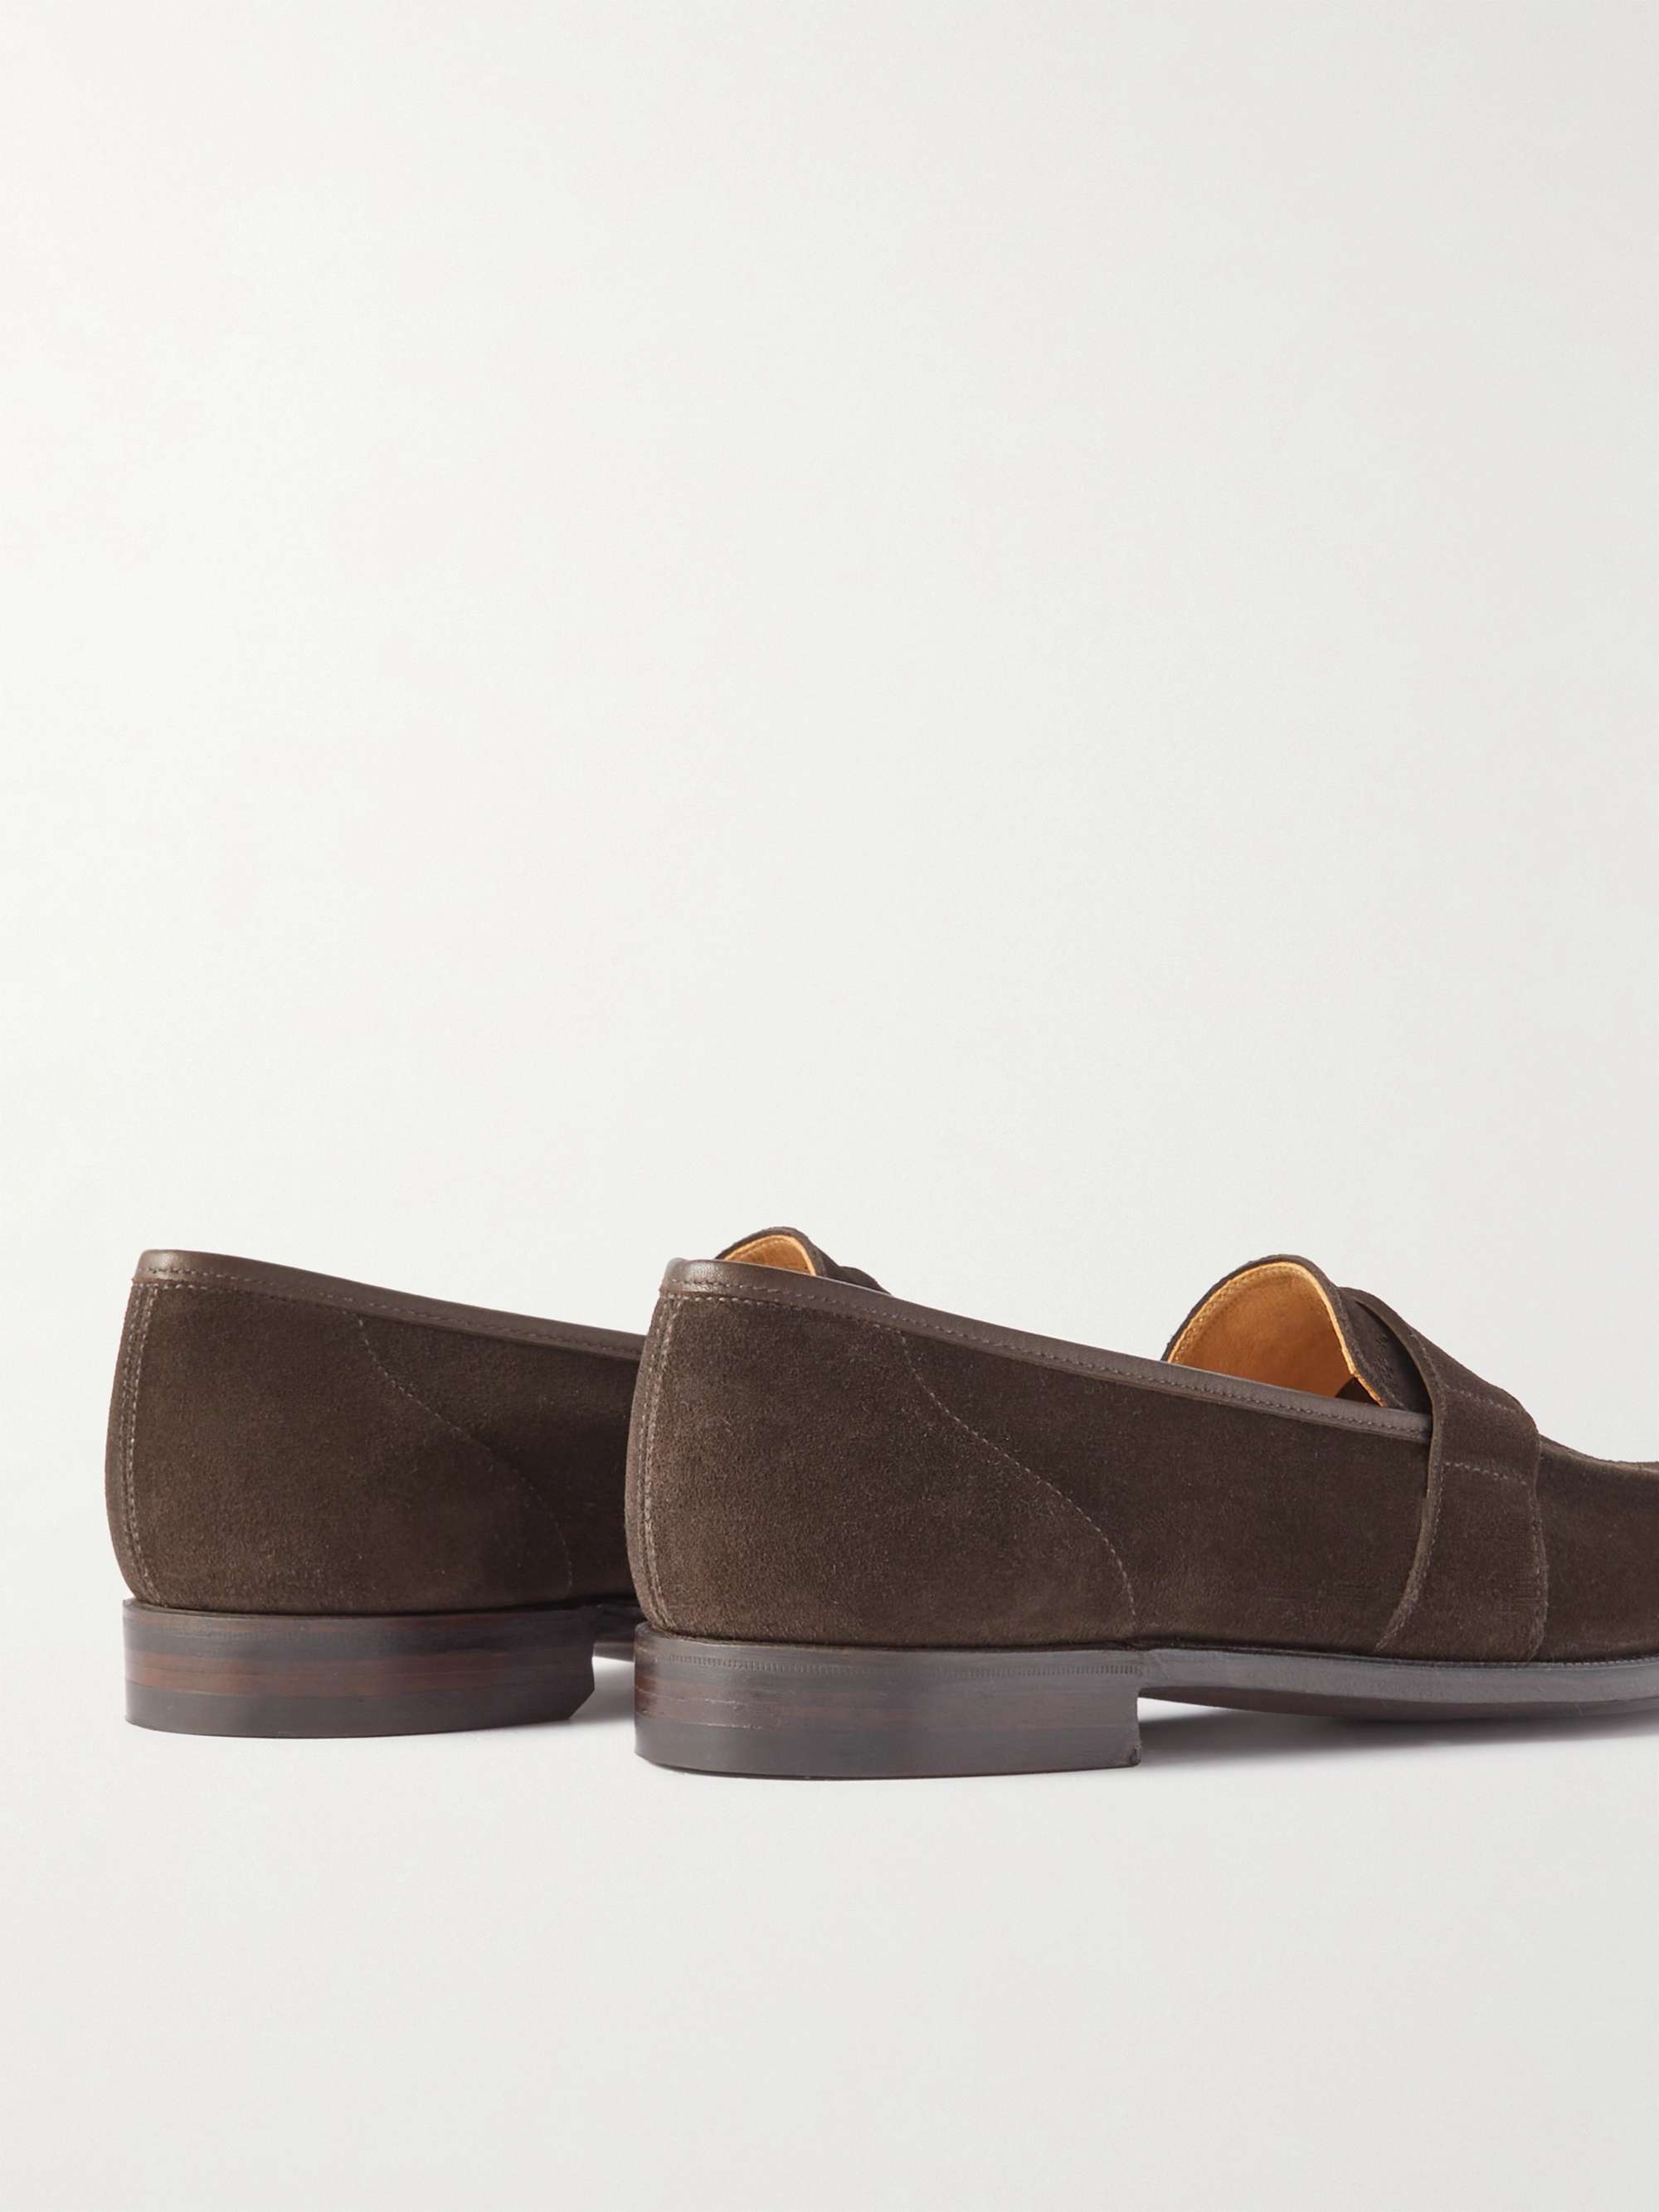 GEORGE CLEVERLEY Owen Suede Penny Loafers